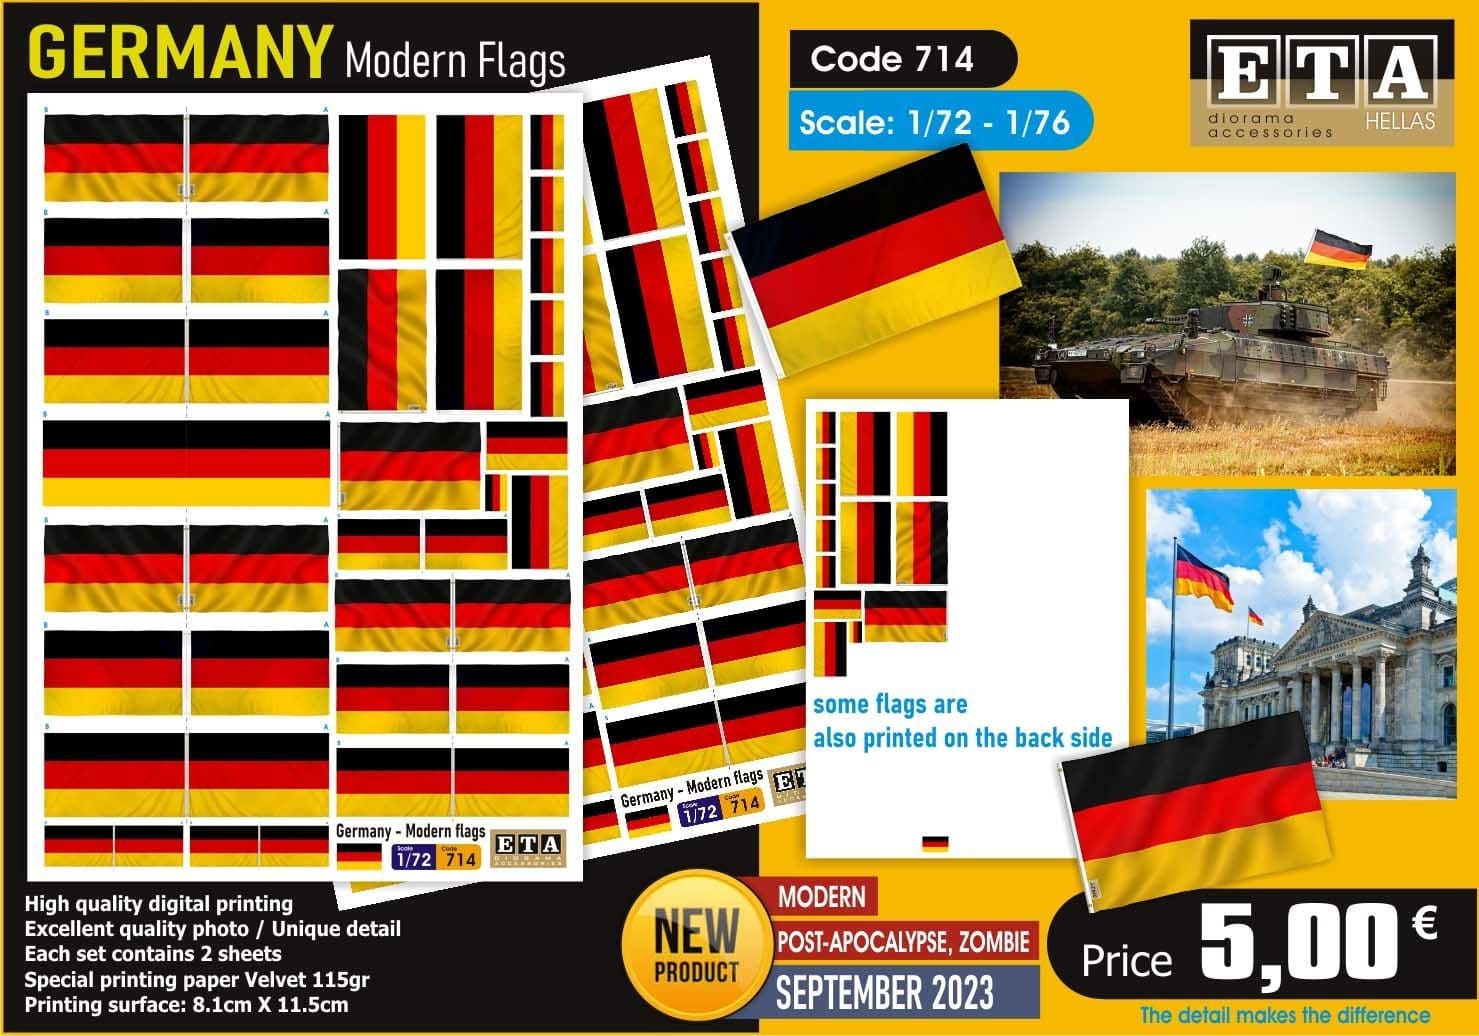 ETA Diorama Releases New 1-72-76 Scale Maps and Germany Modern Flags